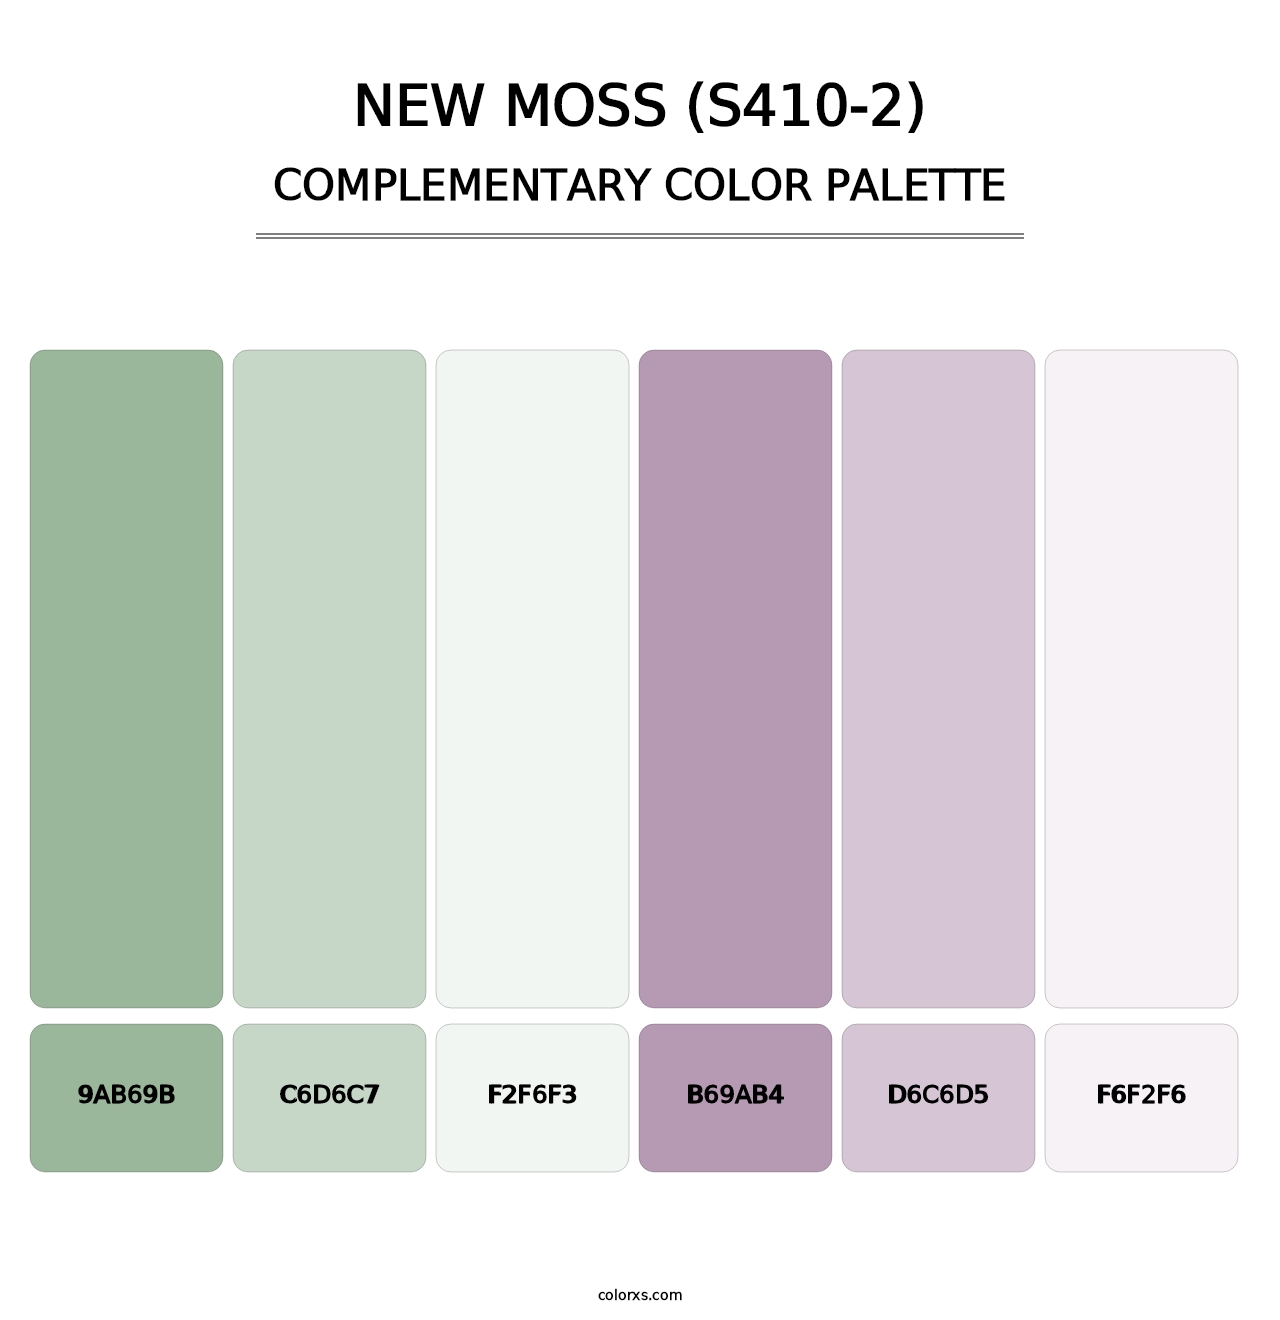 New Moss (S410-2) - Complementary Color Palette